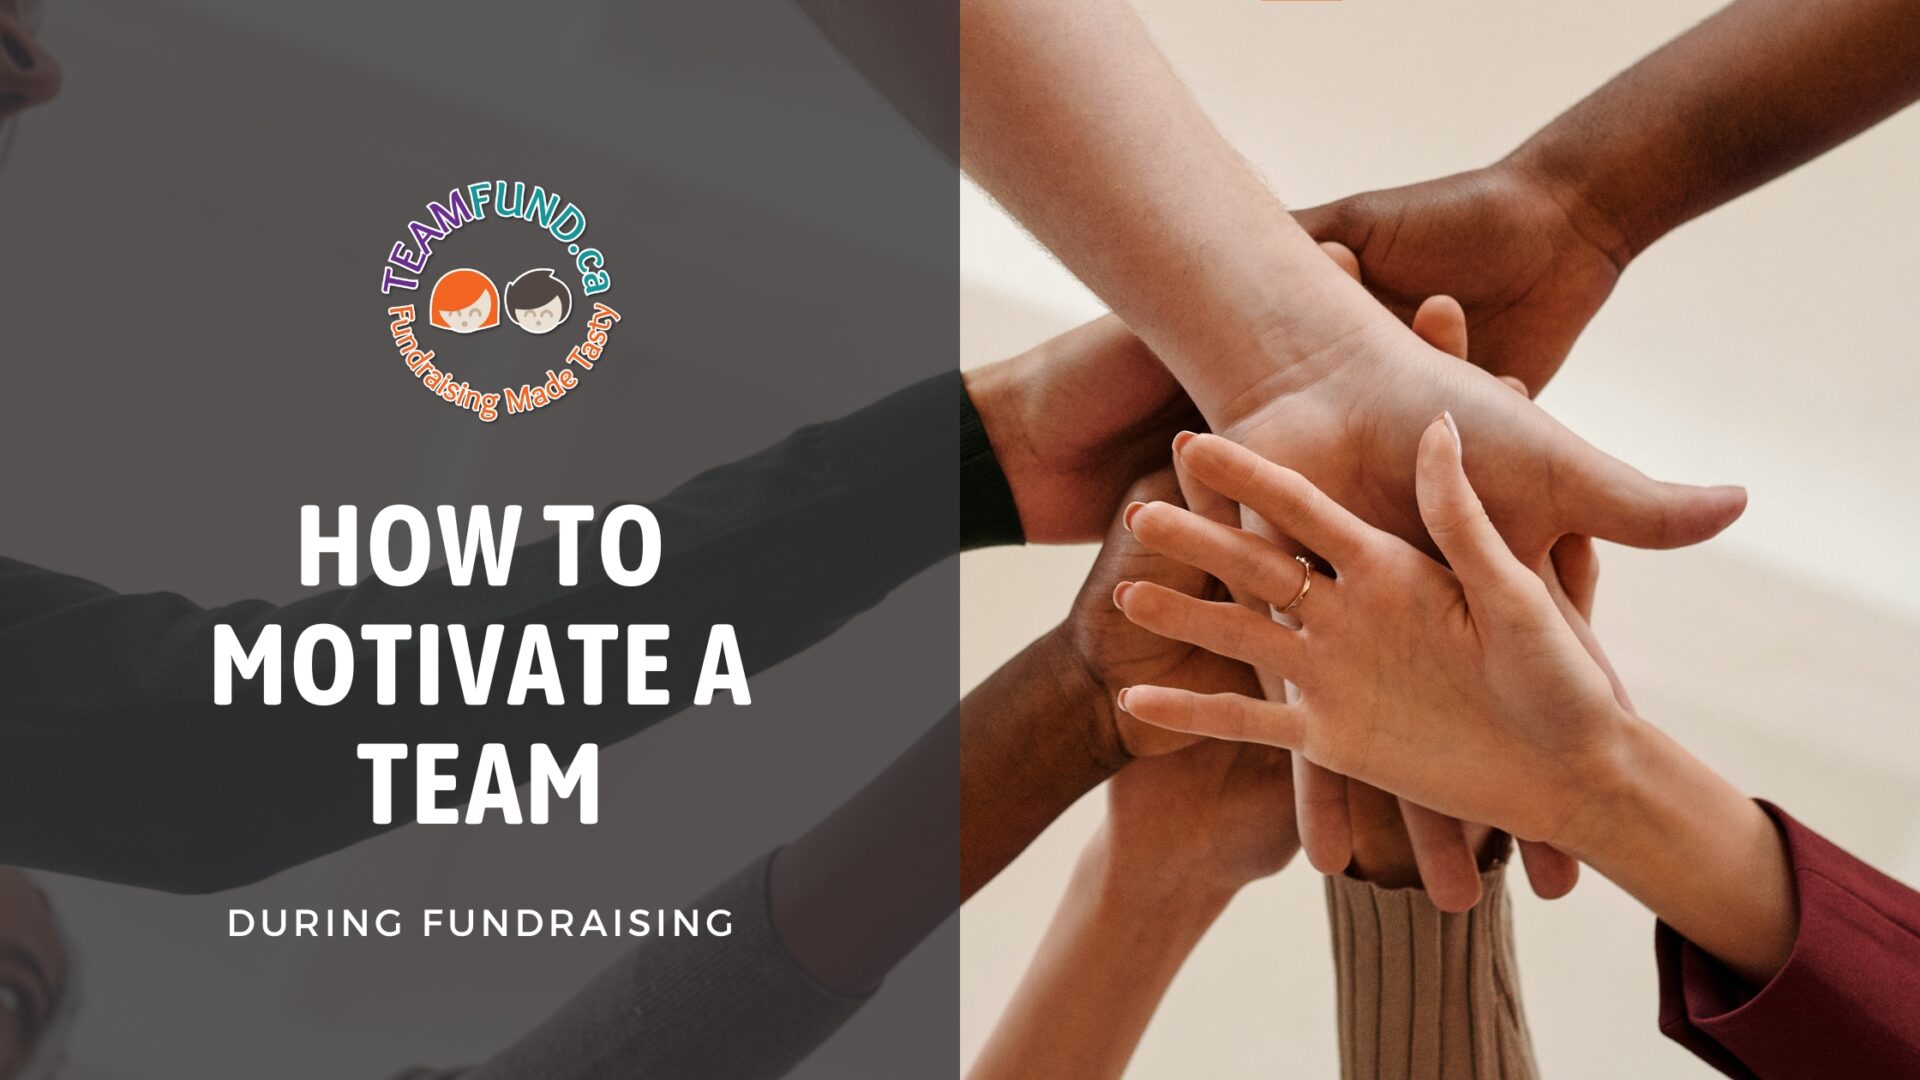 How to Motivate A Team During Fundraising